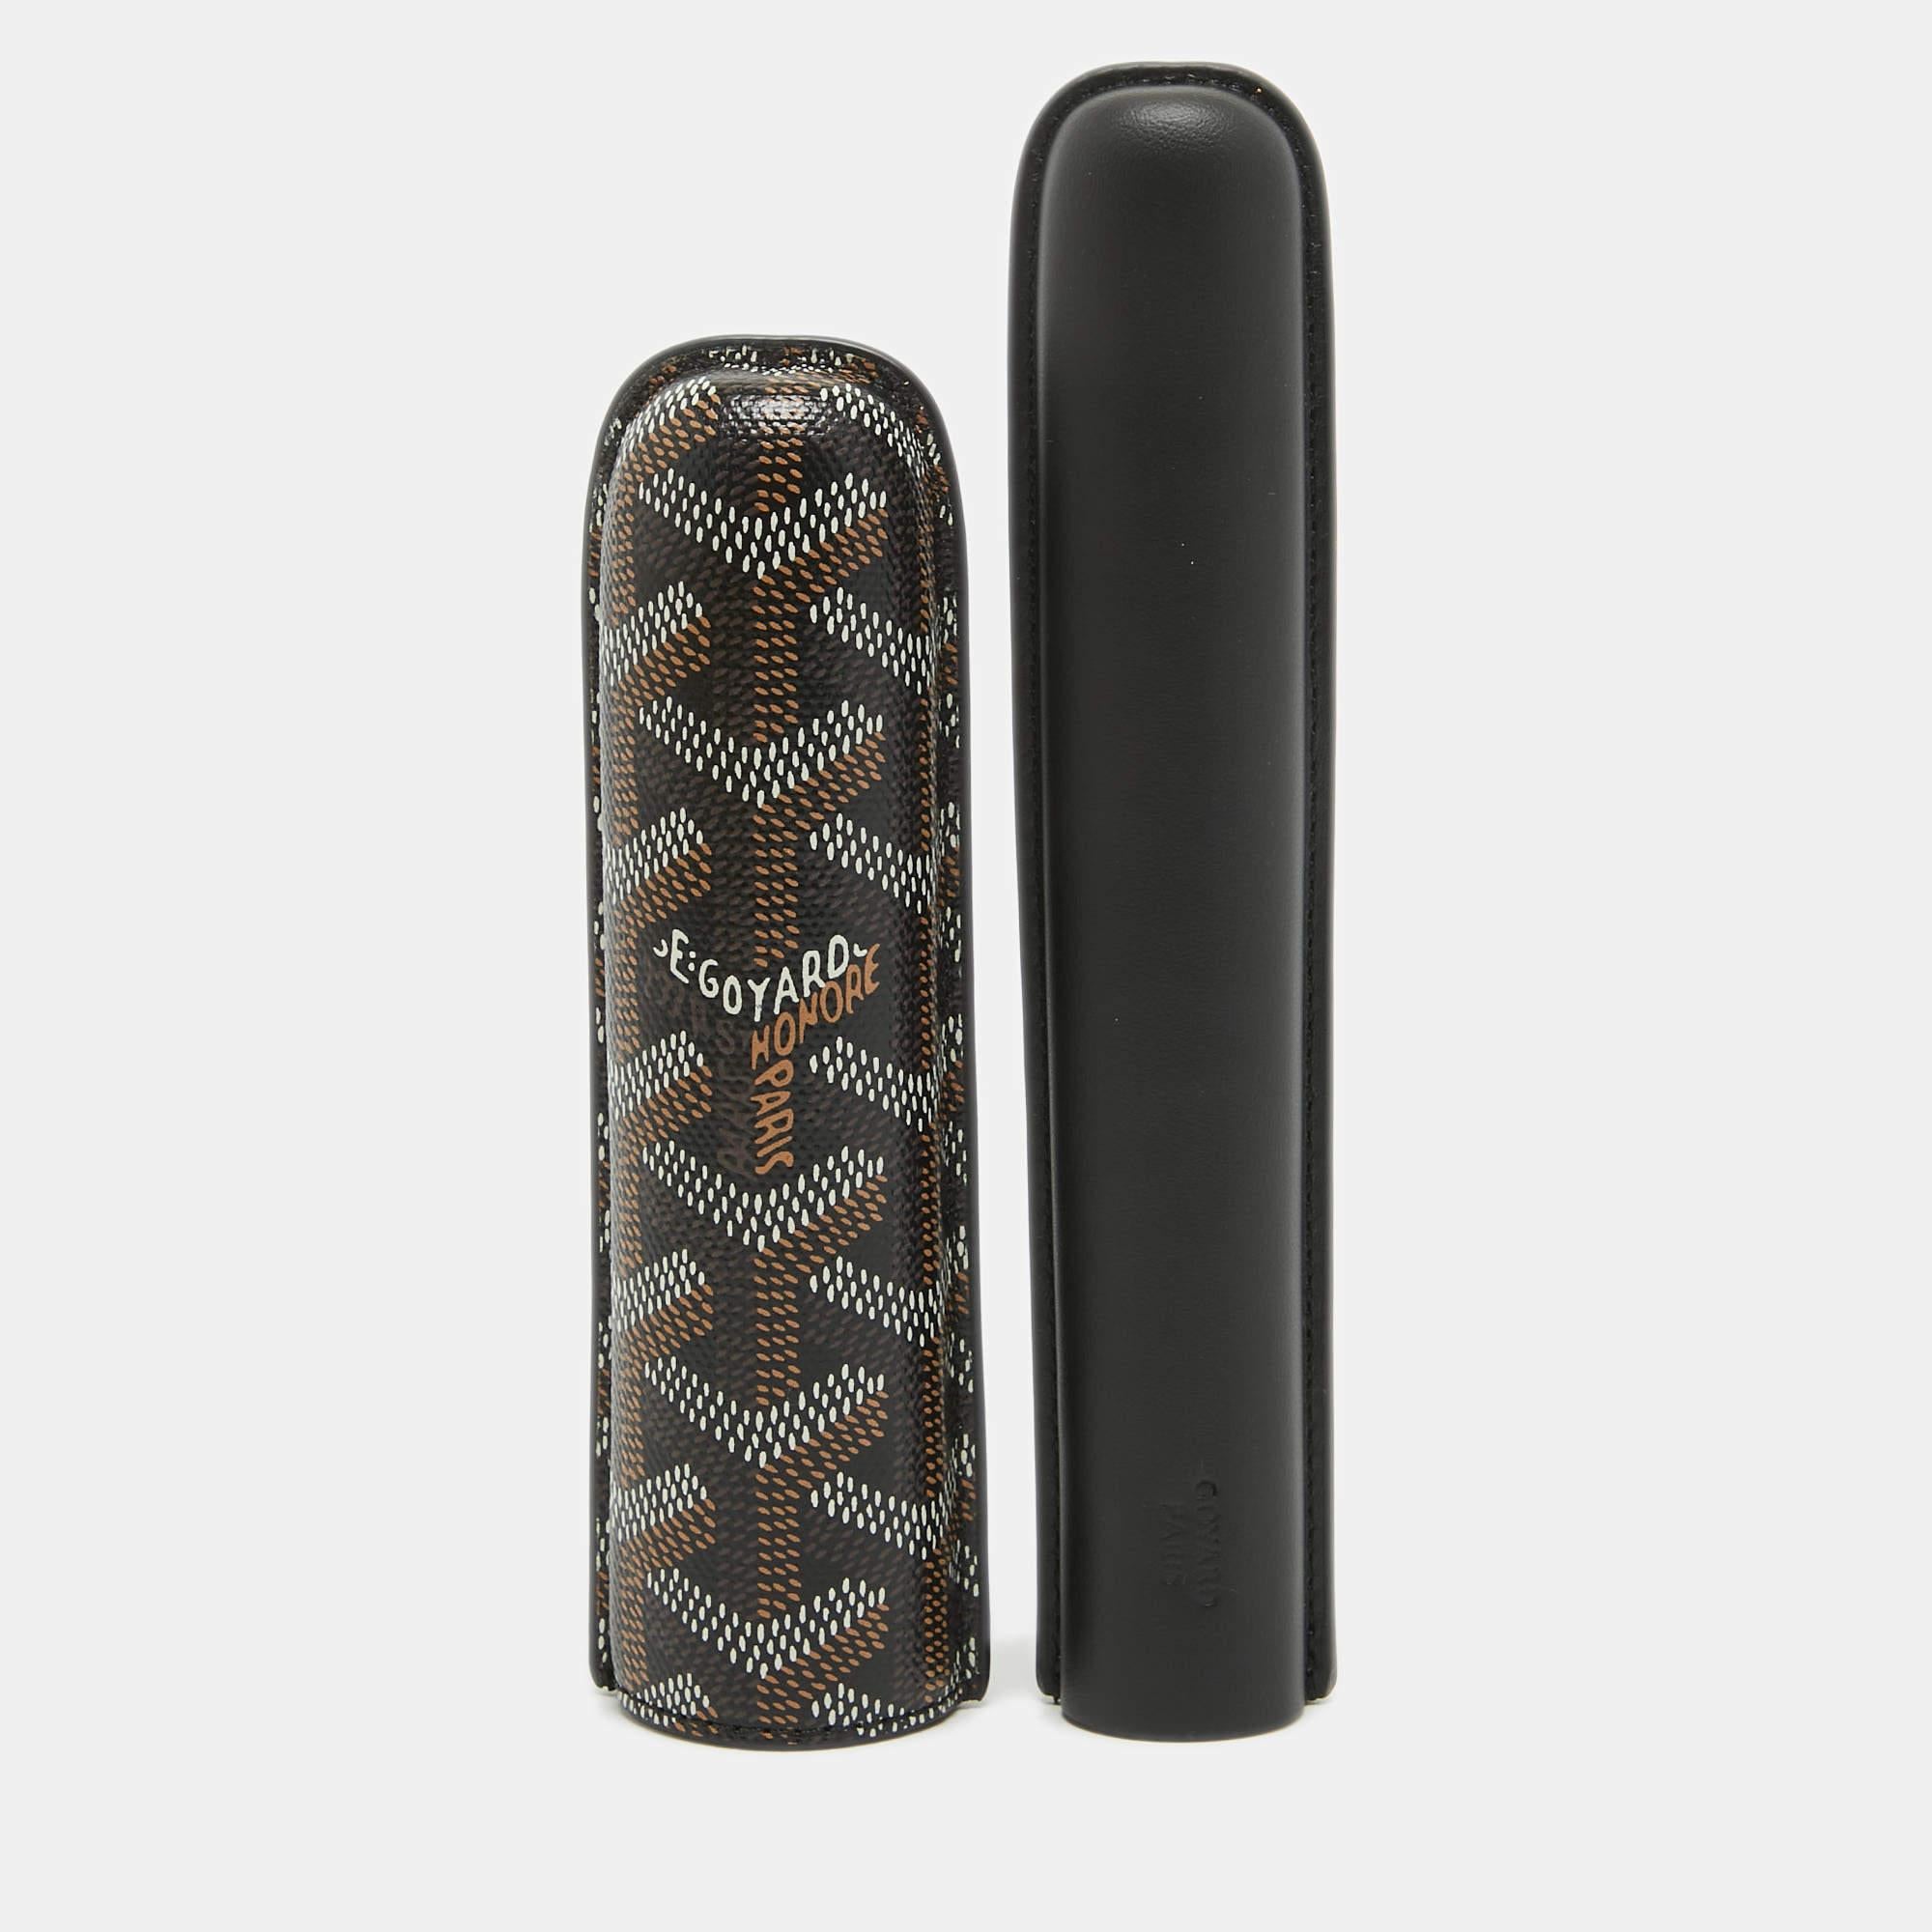 This Churchill cigar case from the house of Goyard is crafted from signature Goyardine-coated canvas as well as leather and designed to hold a single cigar.

Includes
Original Box, Original Dust Cloth